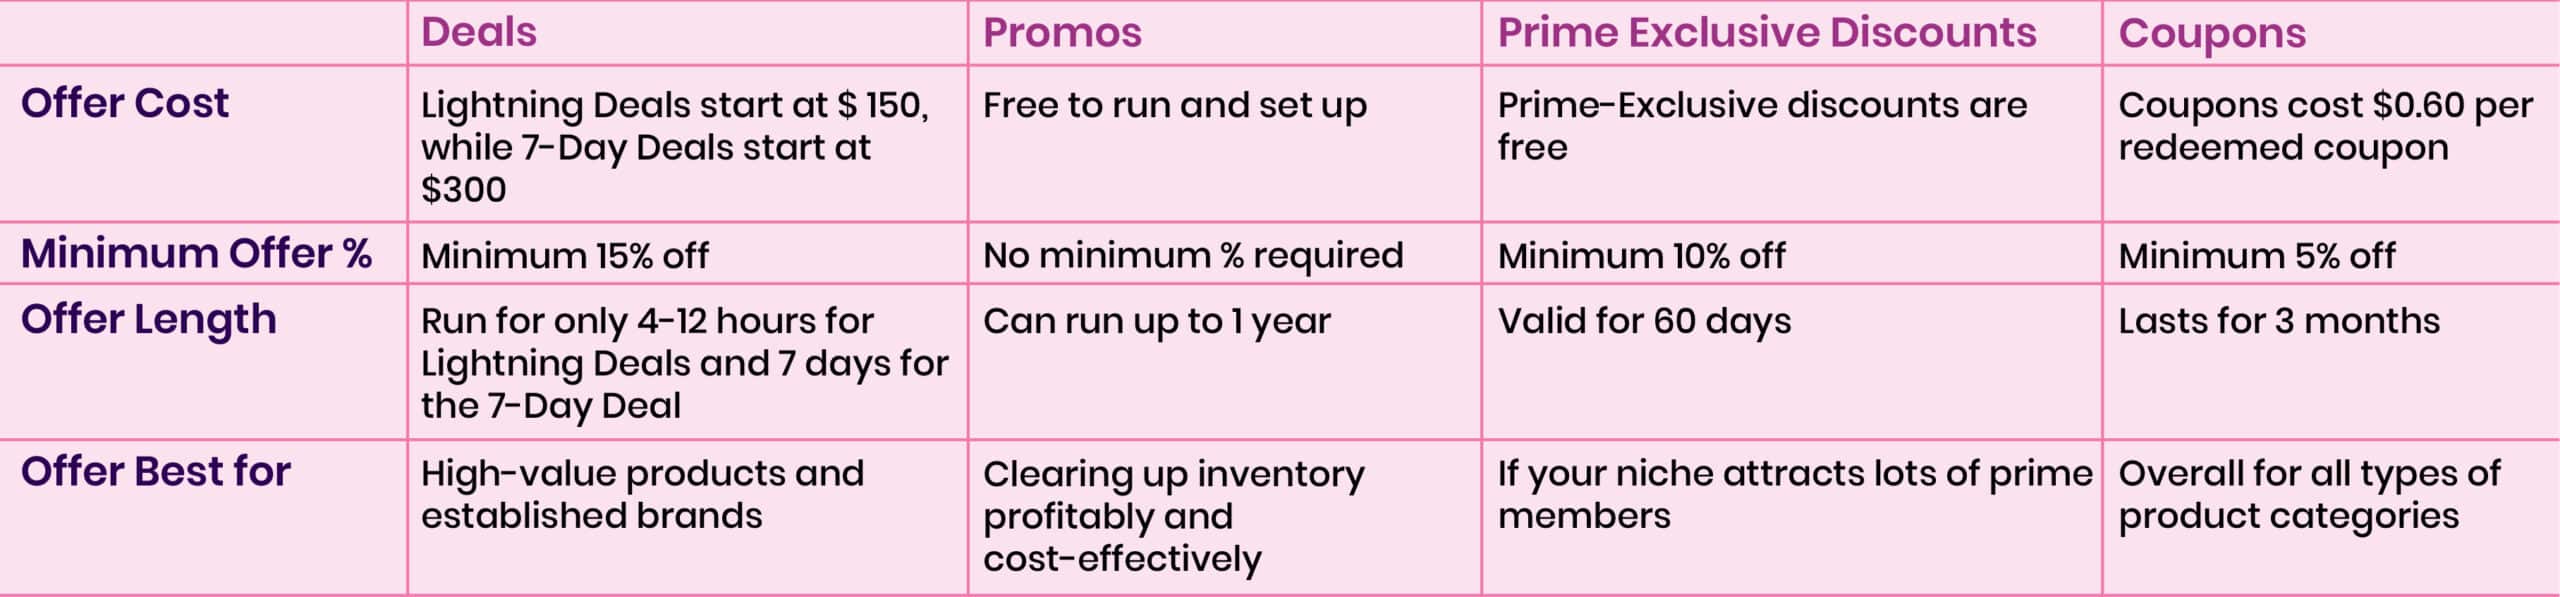 Amazon Sellers Promotion Guide: Promos, Discounts, Deals, & Coupons